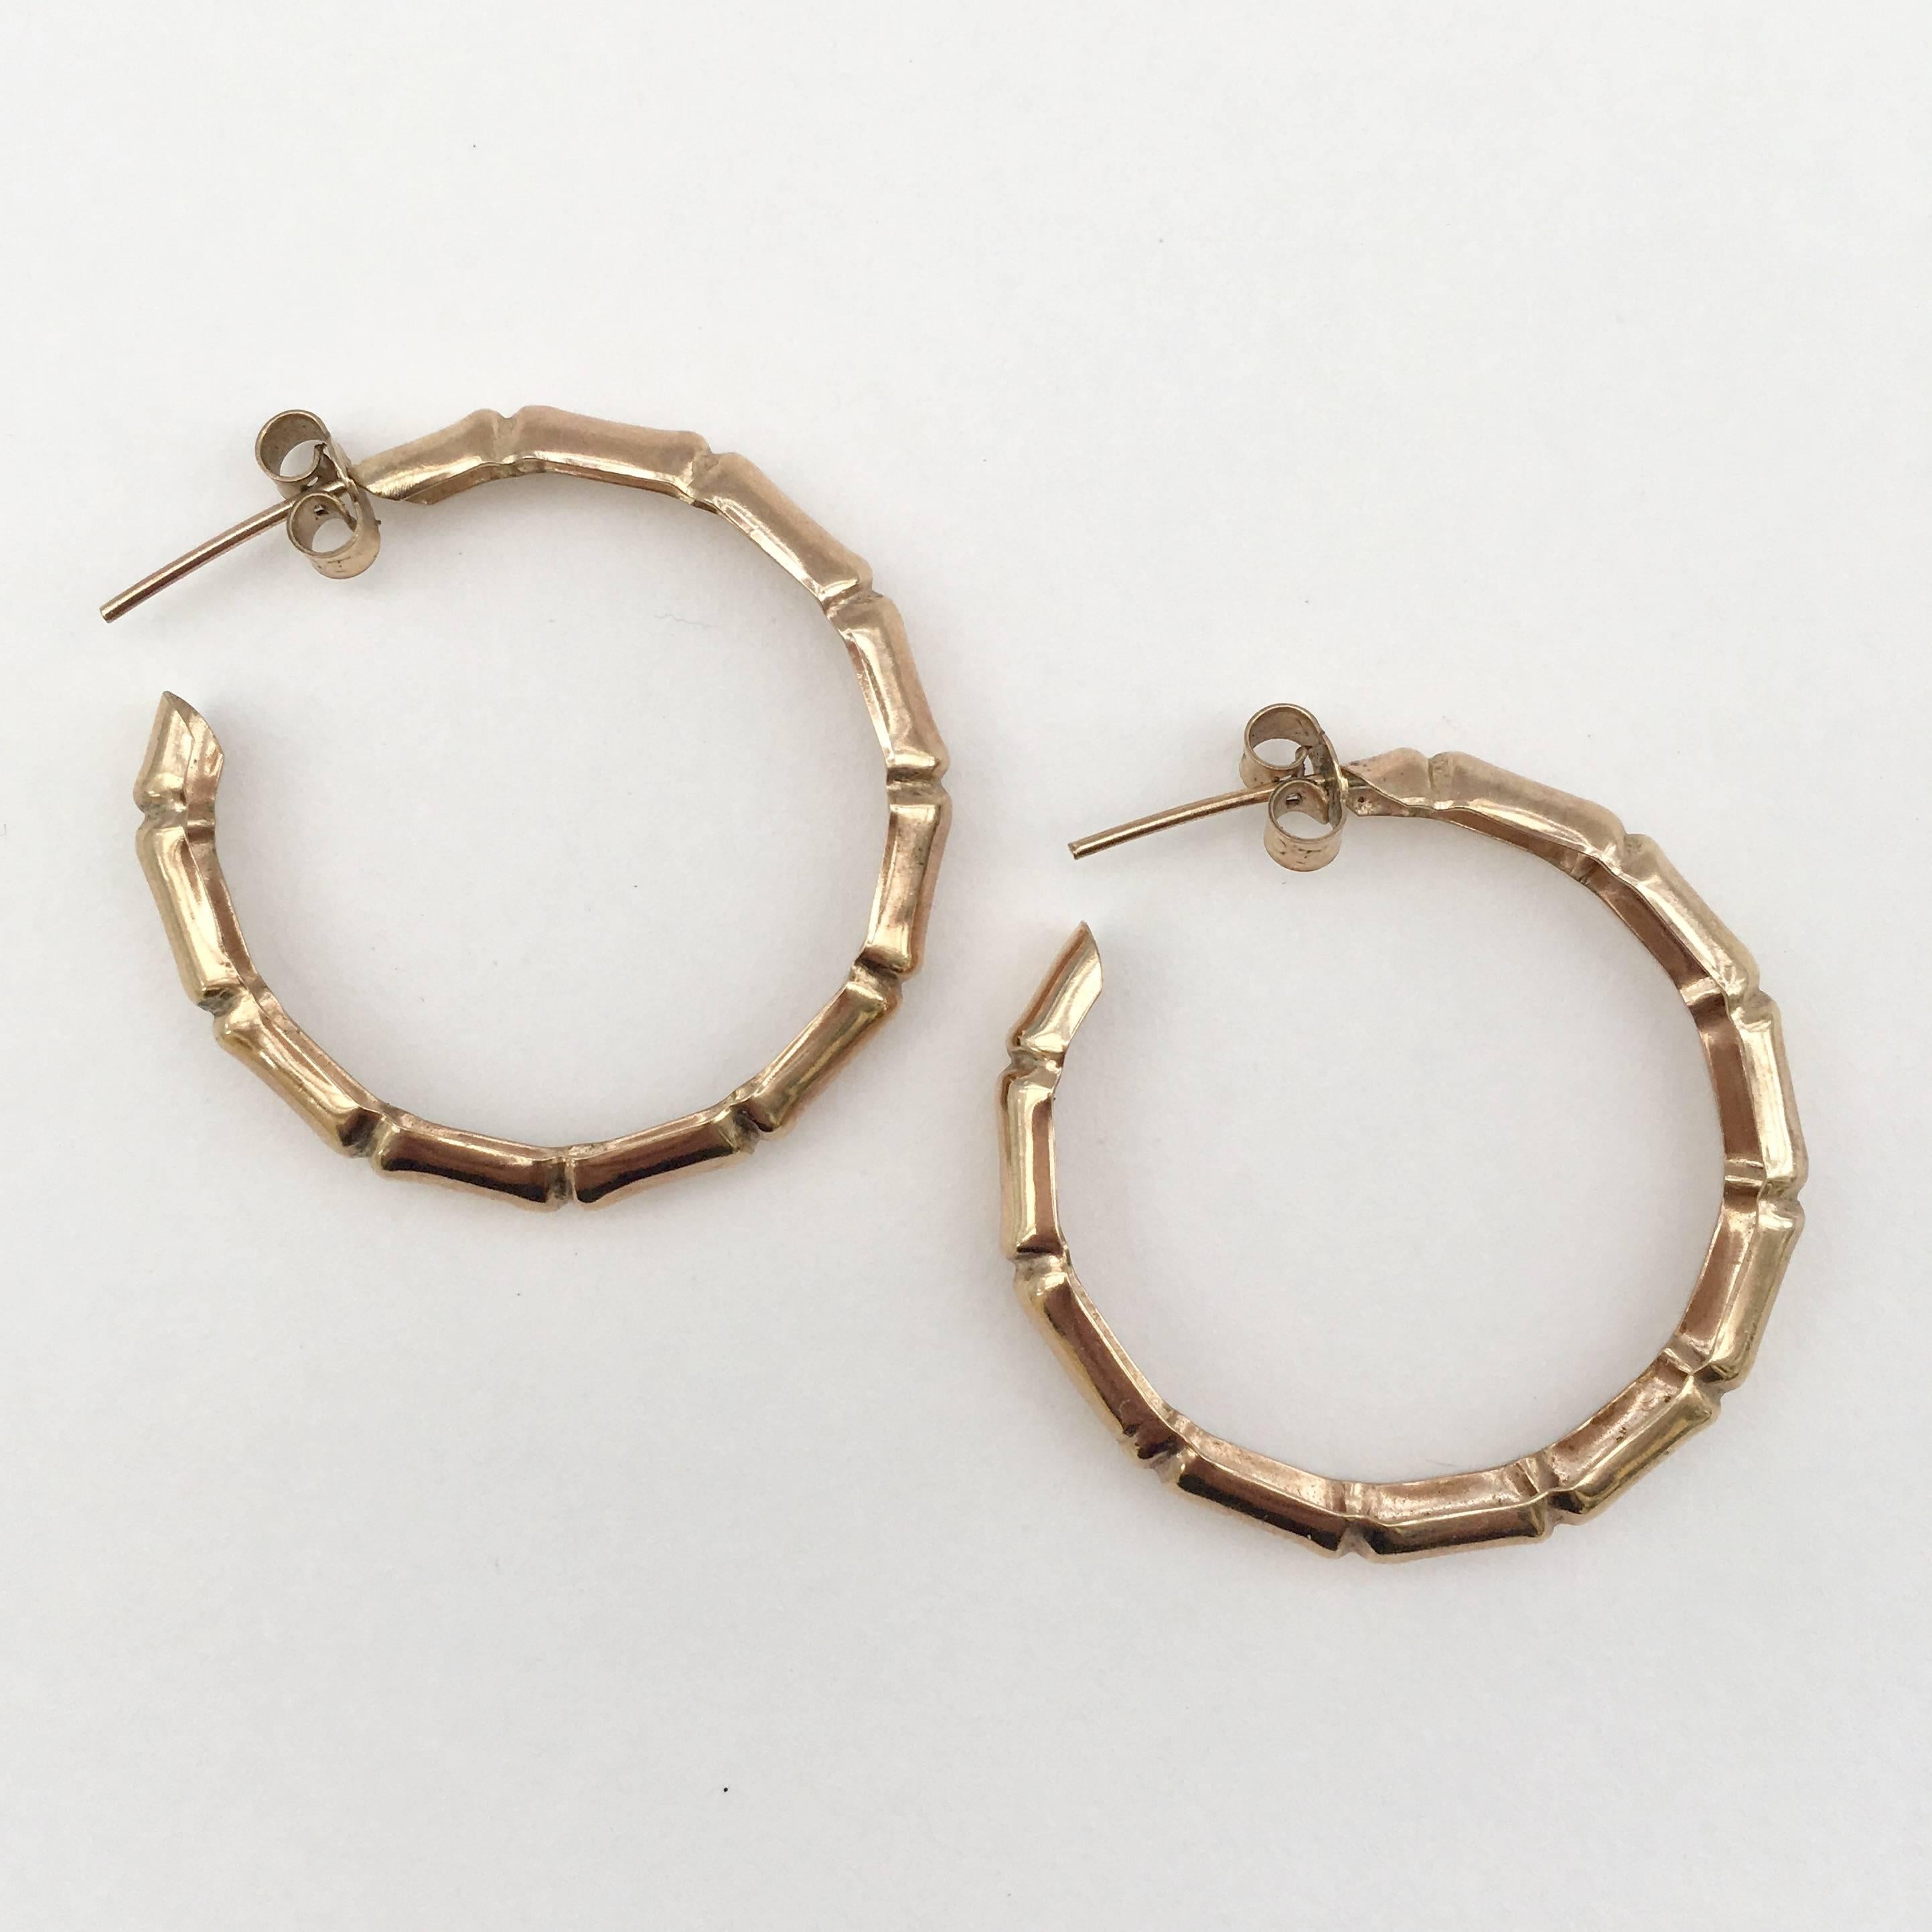 A classic pair of bamboo hoop earrings in delicate 9ct rose gold. These rare 1977 hoops are perfect in every way and will add a fashionable retro touch to any outfit. 